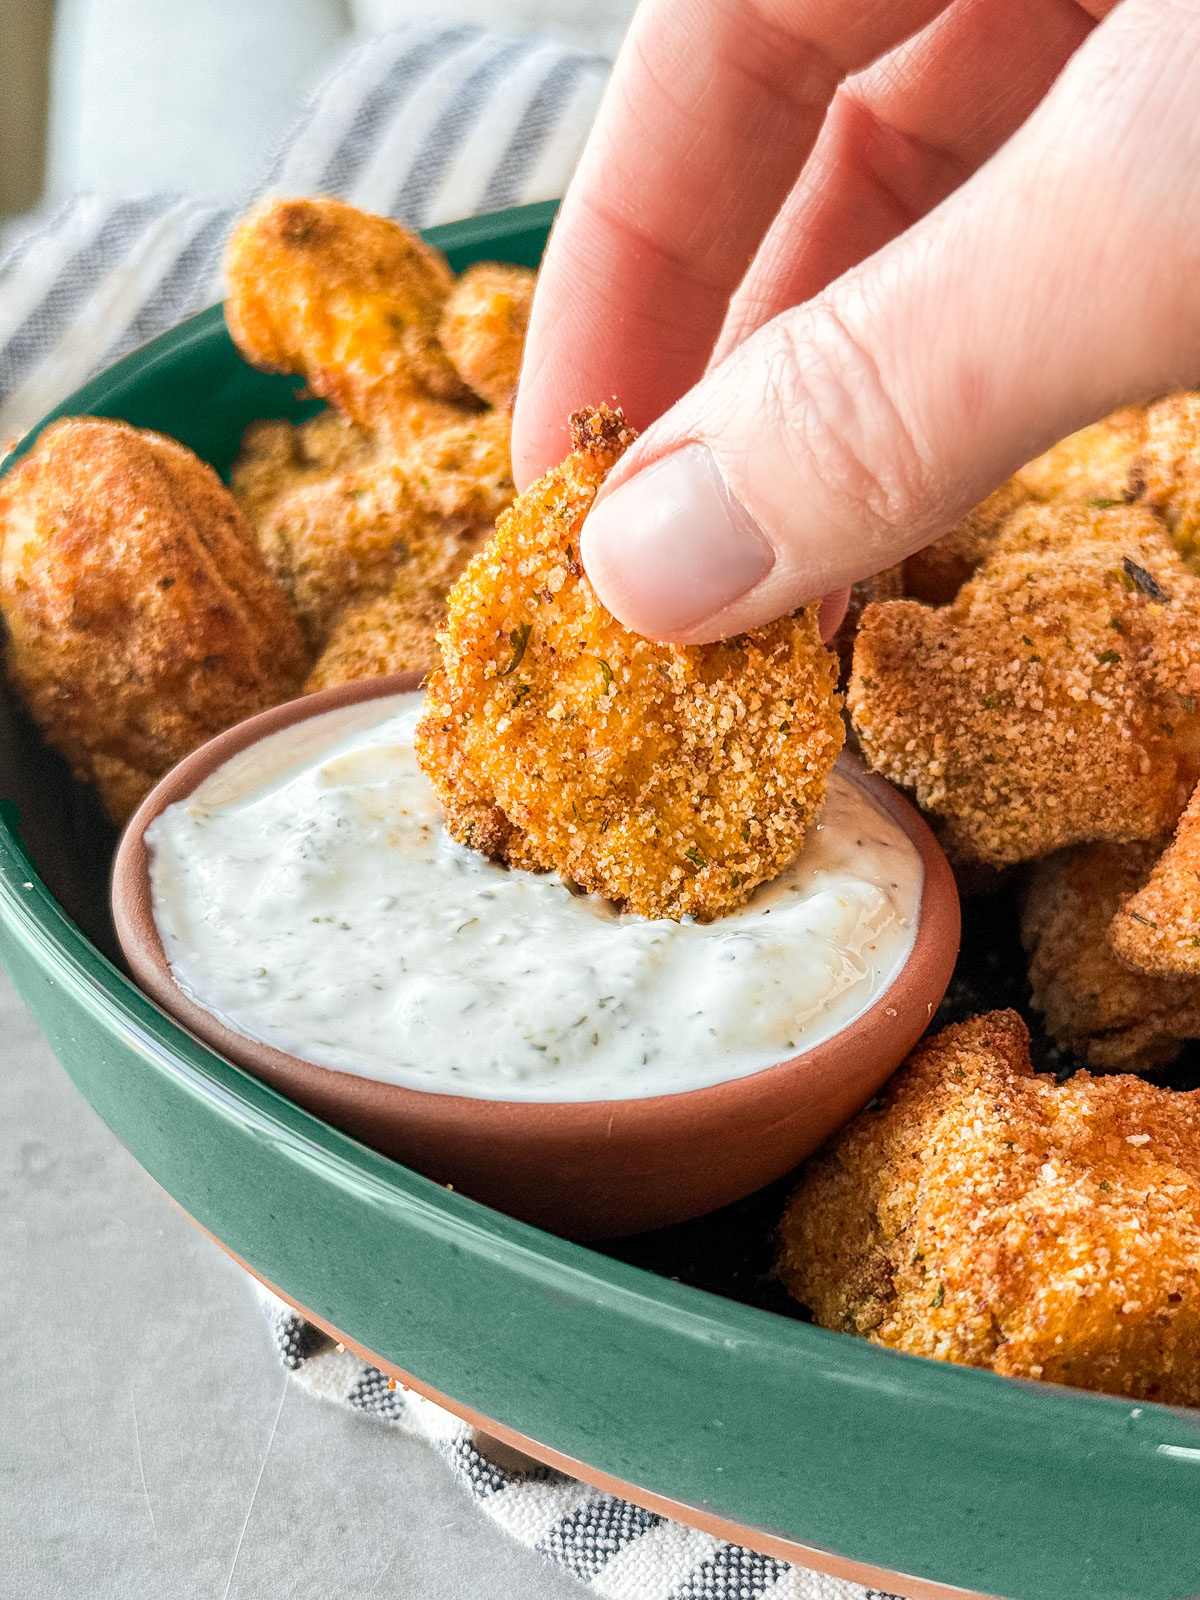 Hand dipping nugget into Ranch dip.